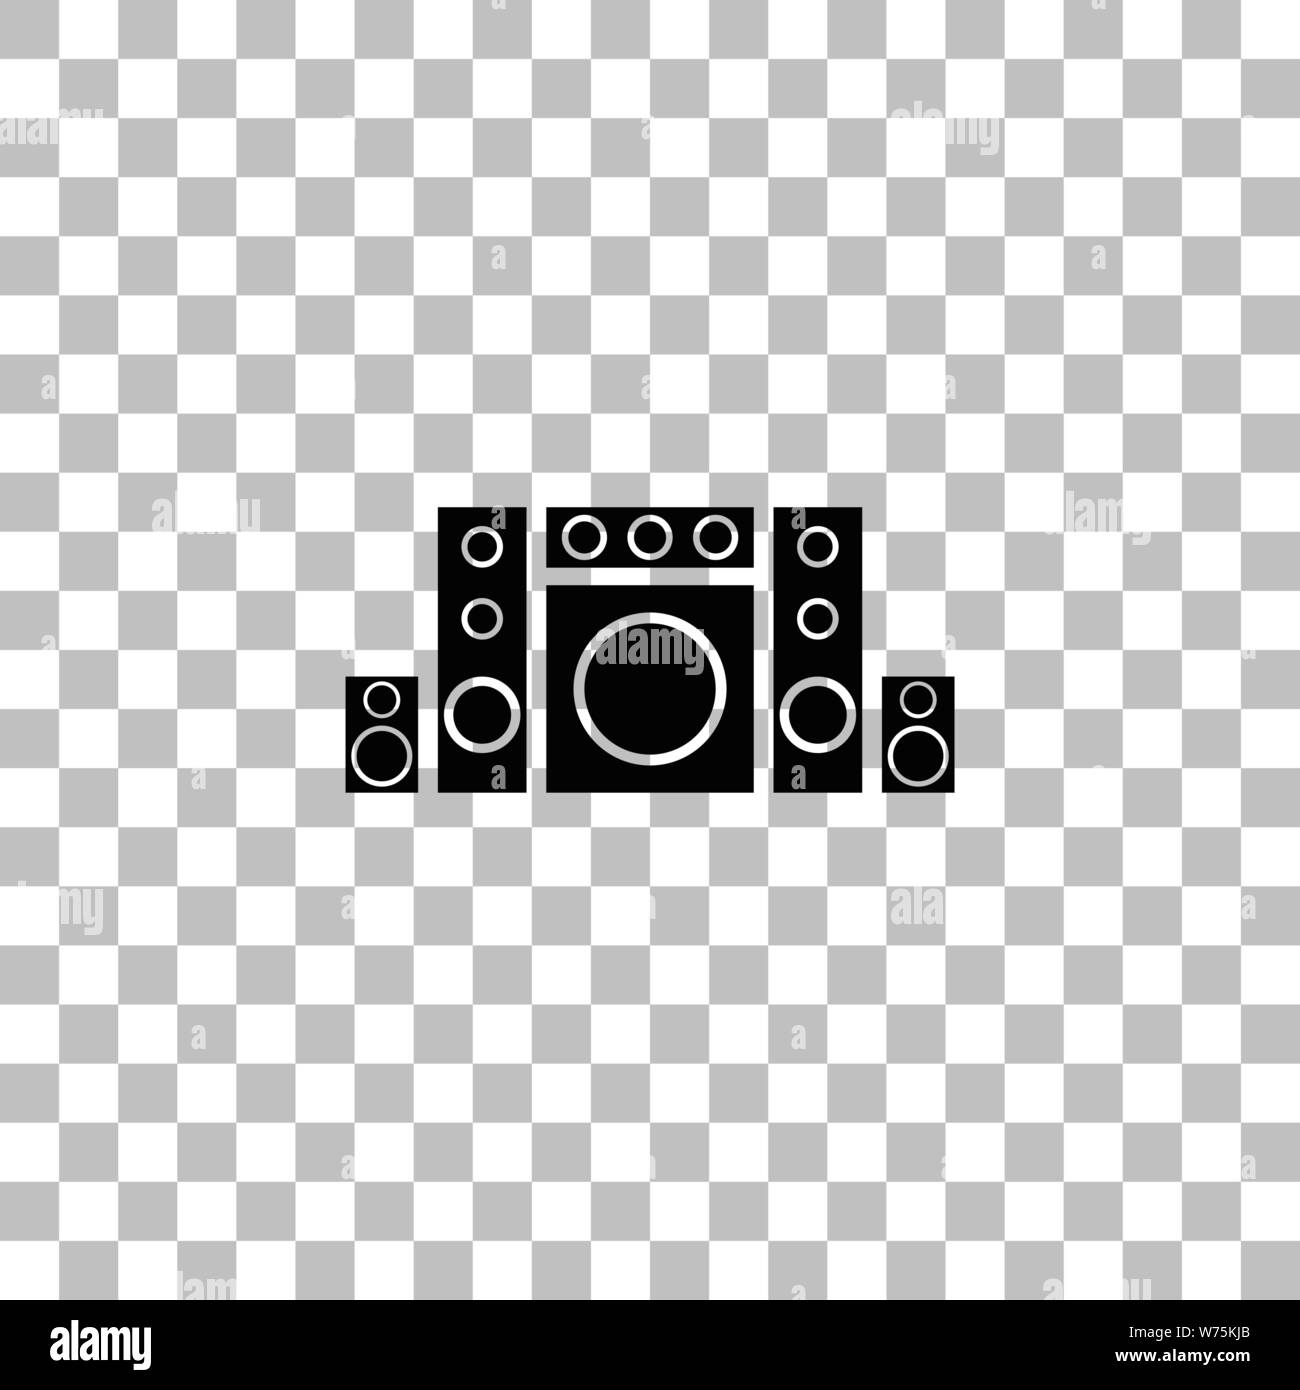 Home theater. Black flat icon on a transparent background. Pictogram for your project Stock Vector